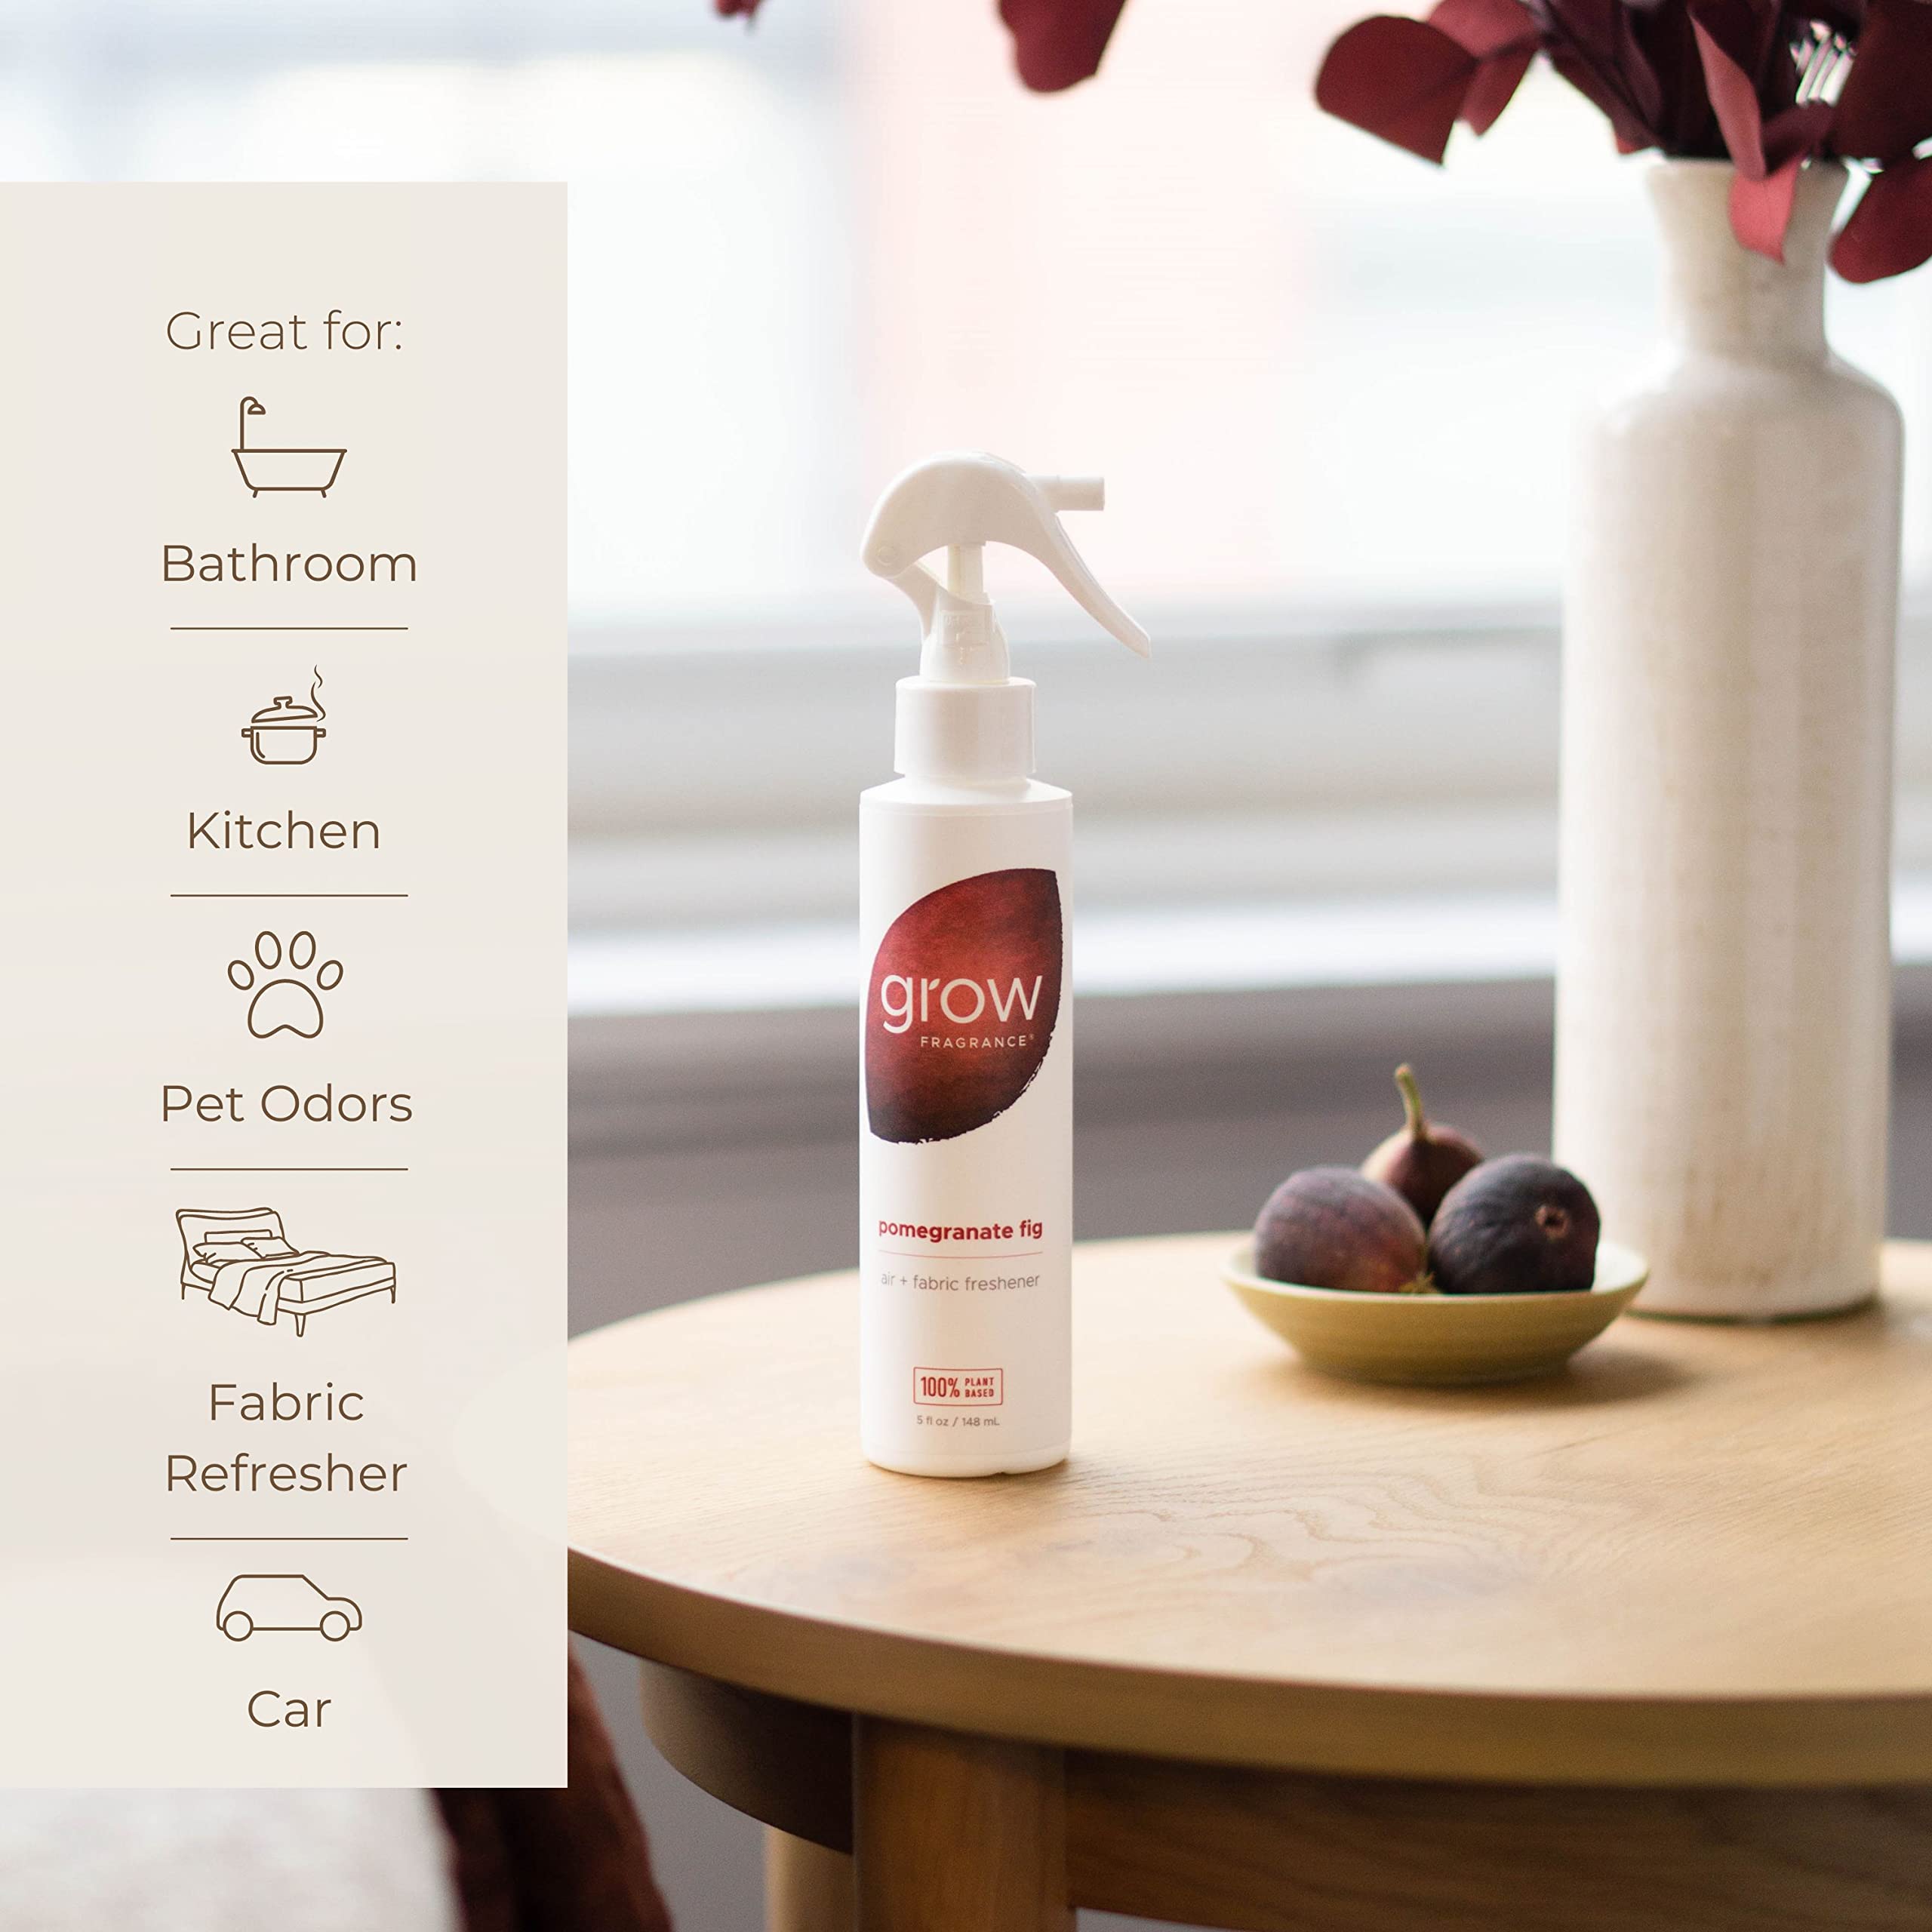 Grow Fragrance - Certified Non Toxic, 100% Plant Based Fabric and Room Air Freshener Spray. Made with All Natural Essential Oils -Pomegranate Fig Scent - Great Deodorizer Odor Eliminator